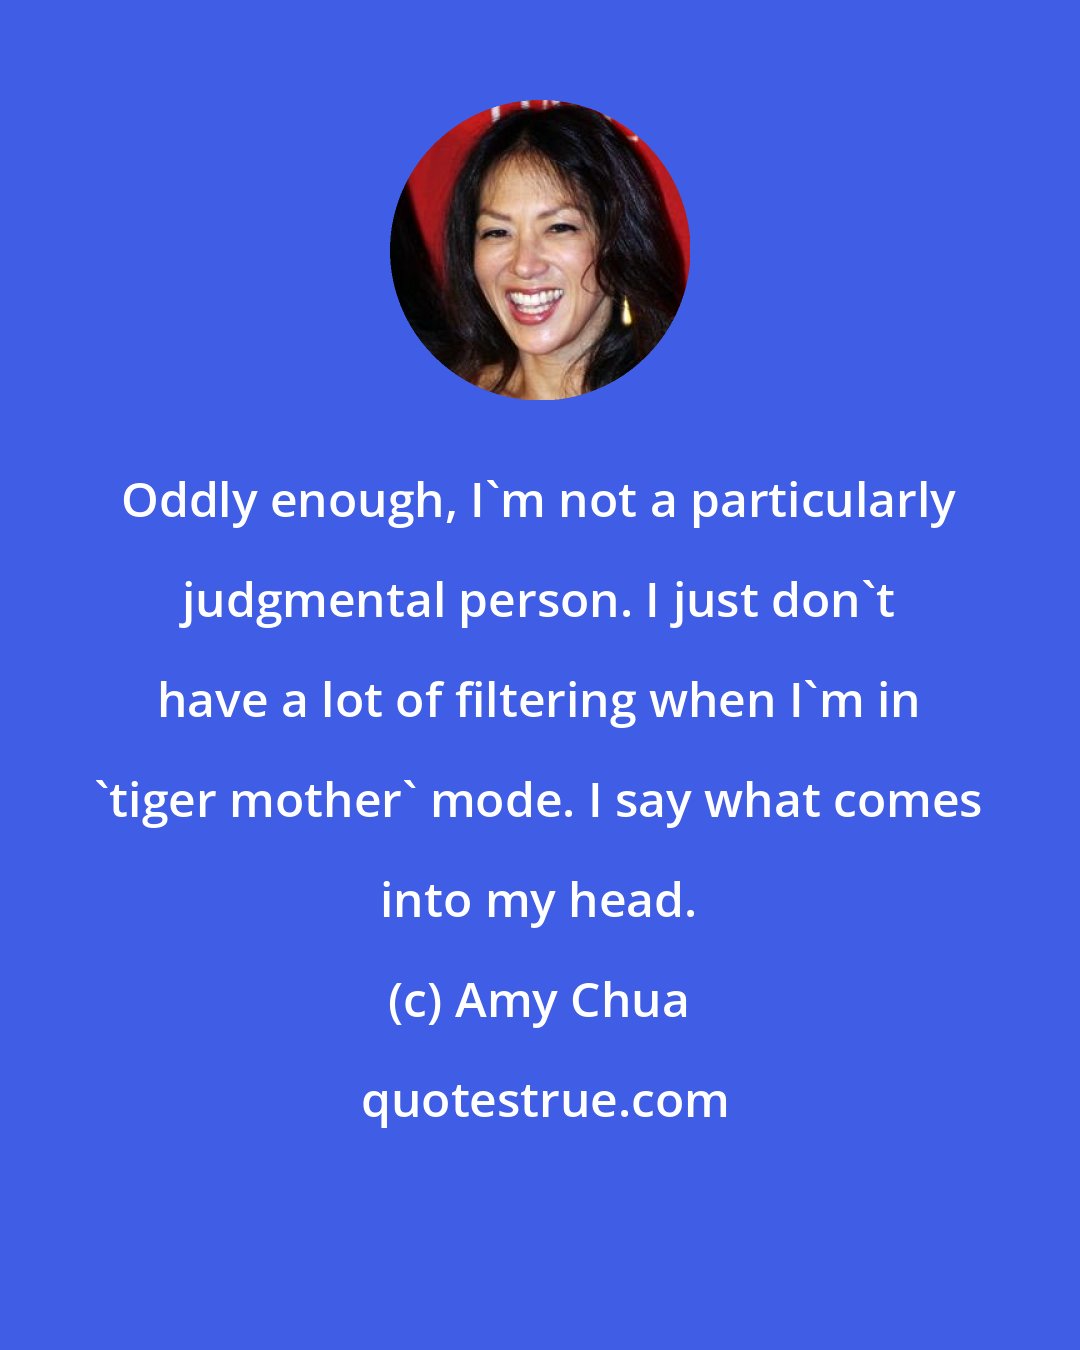 Amy Chua: Oddly enough, I'm not a particularly judgmental person. I just don't have a lot of filtering when I'm in 'tiger mother' mode. I say what comes into my head.